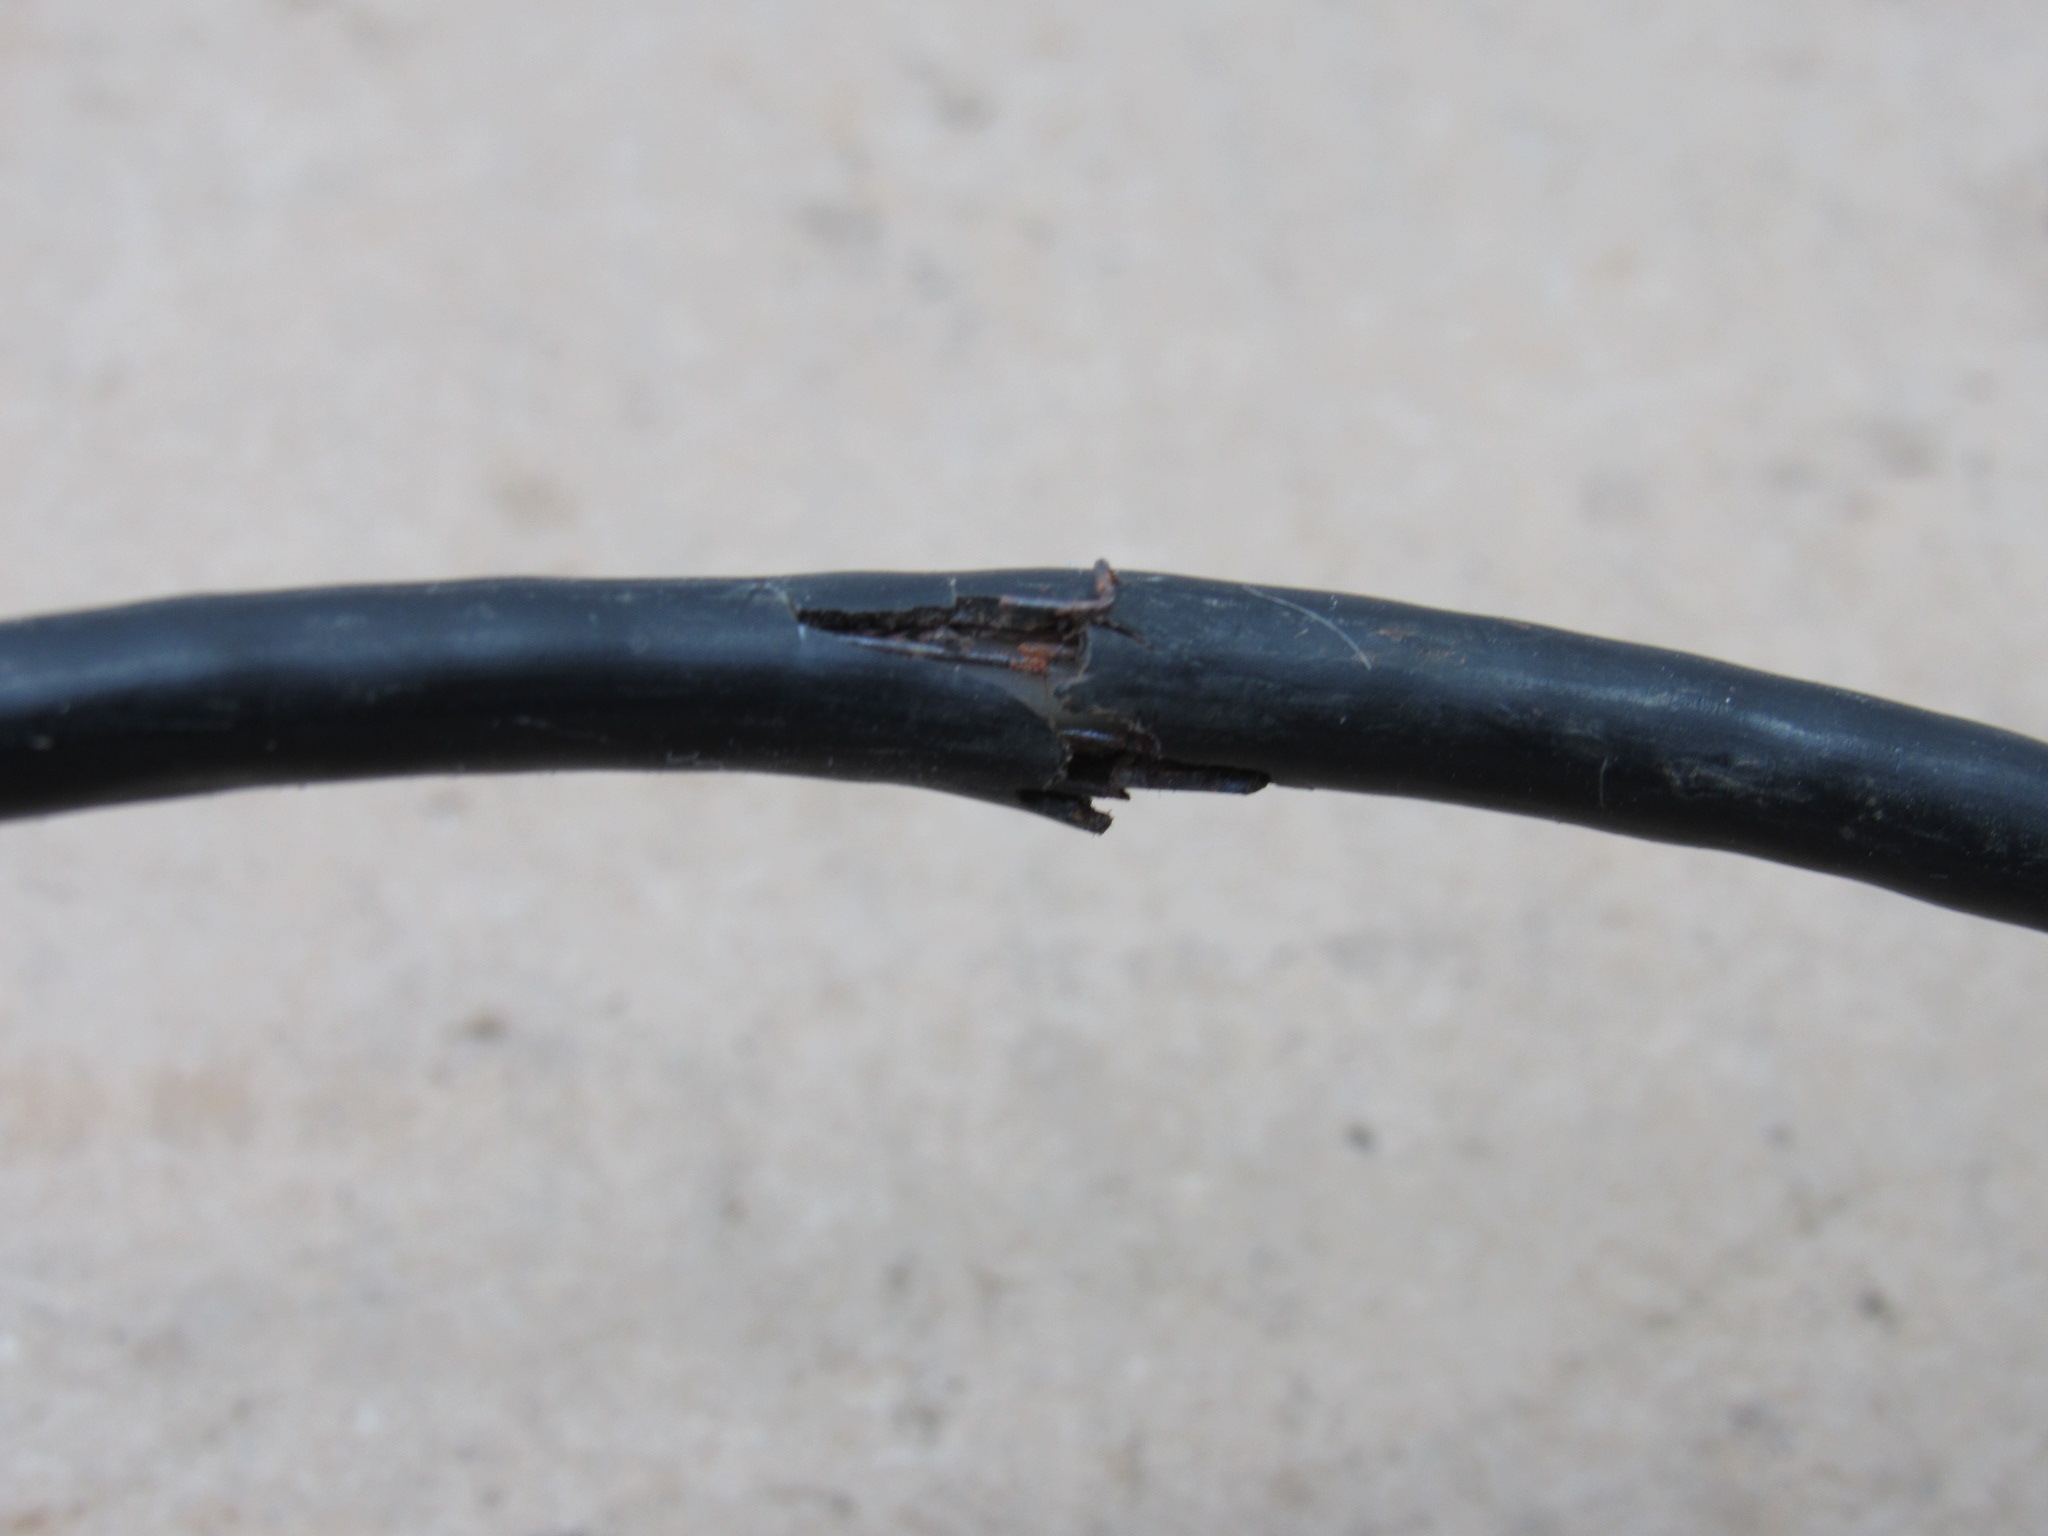 cable has a small crack in the plastic housing